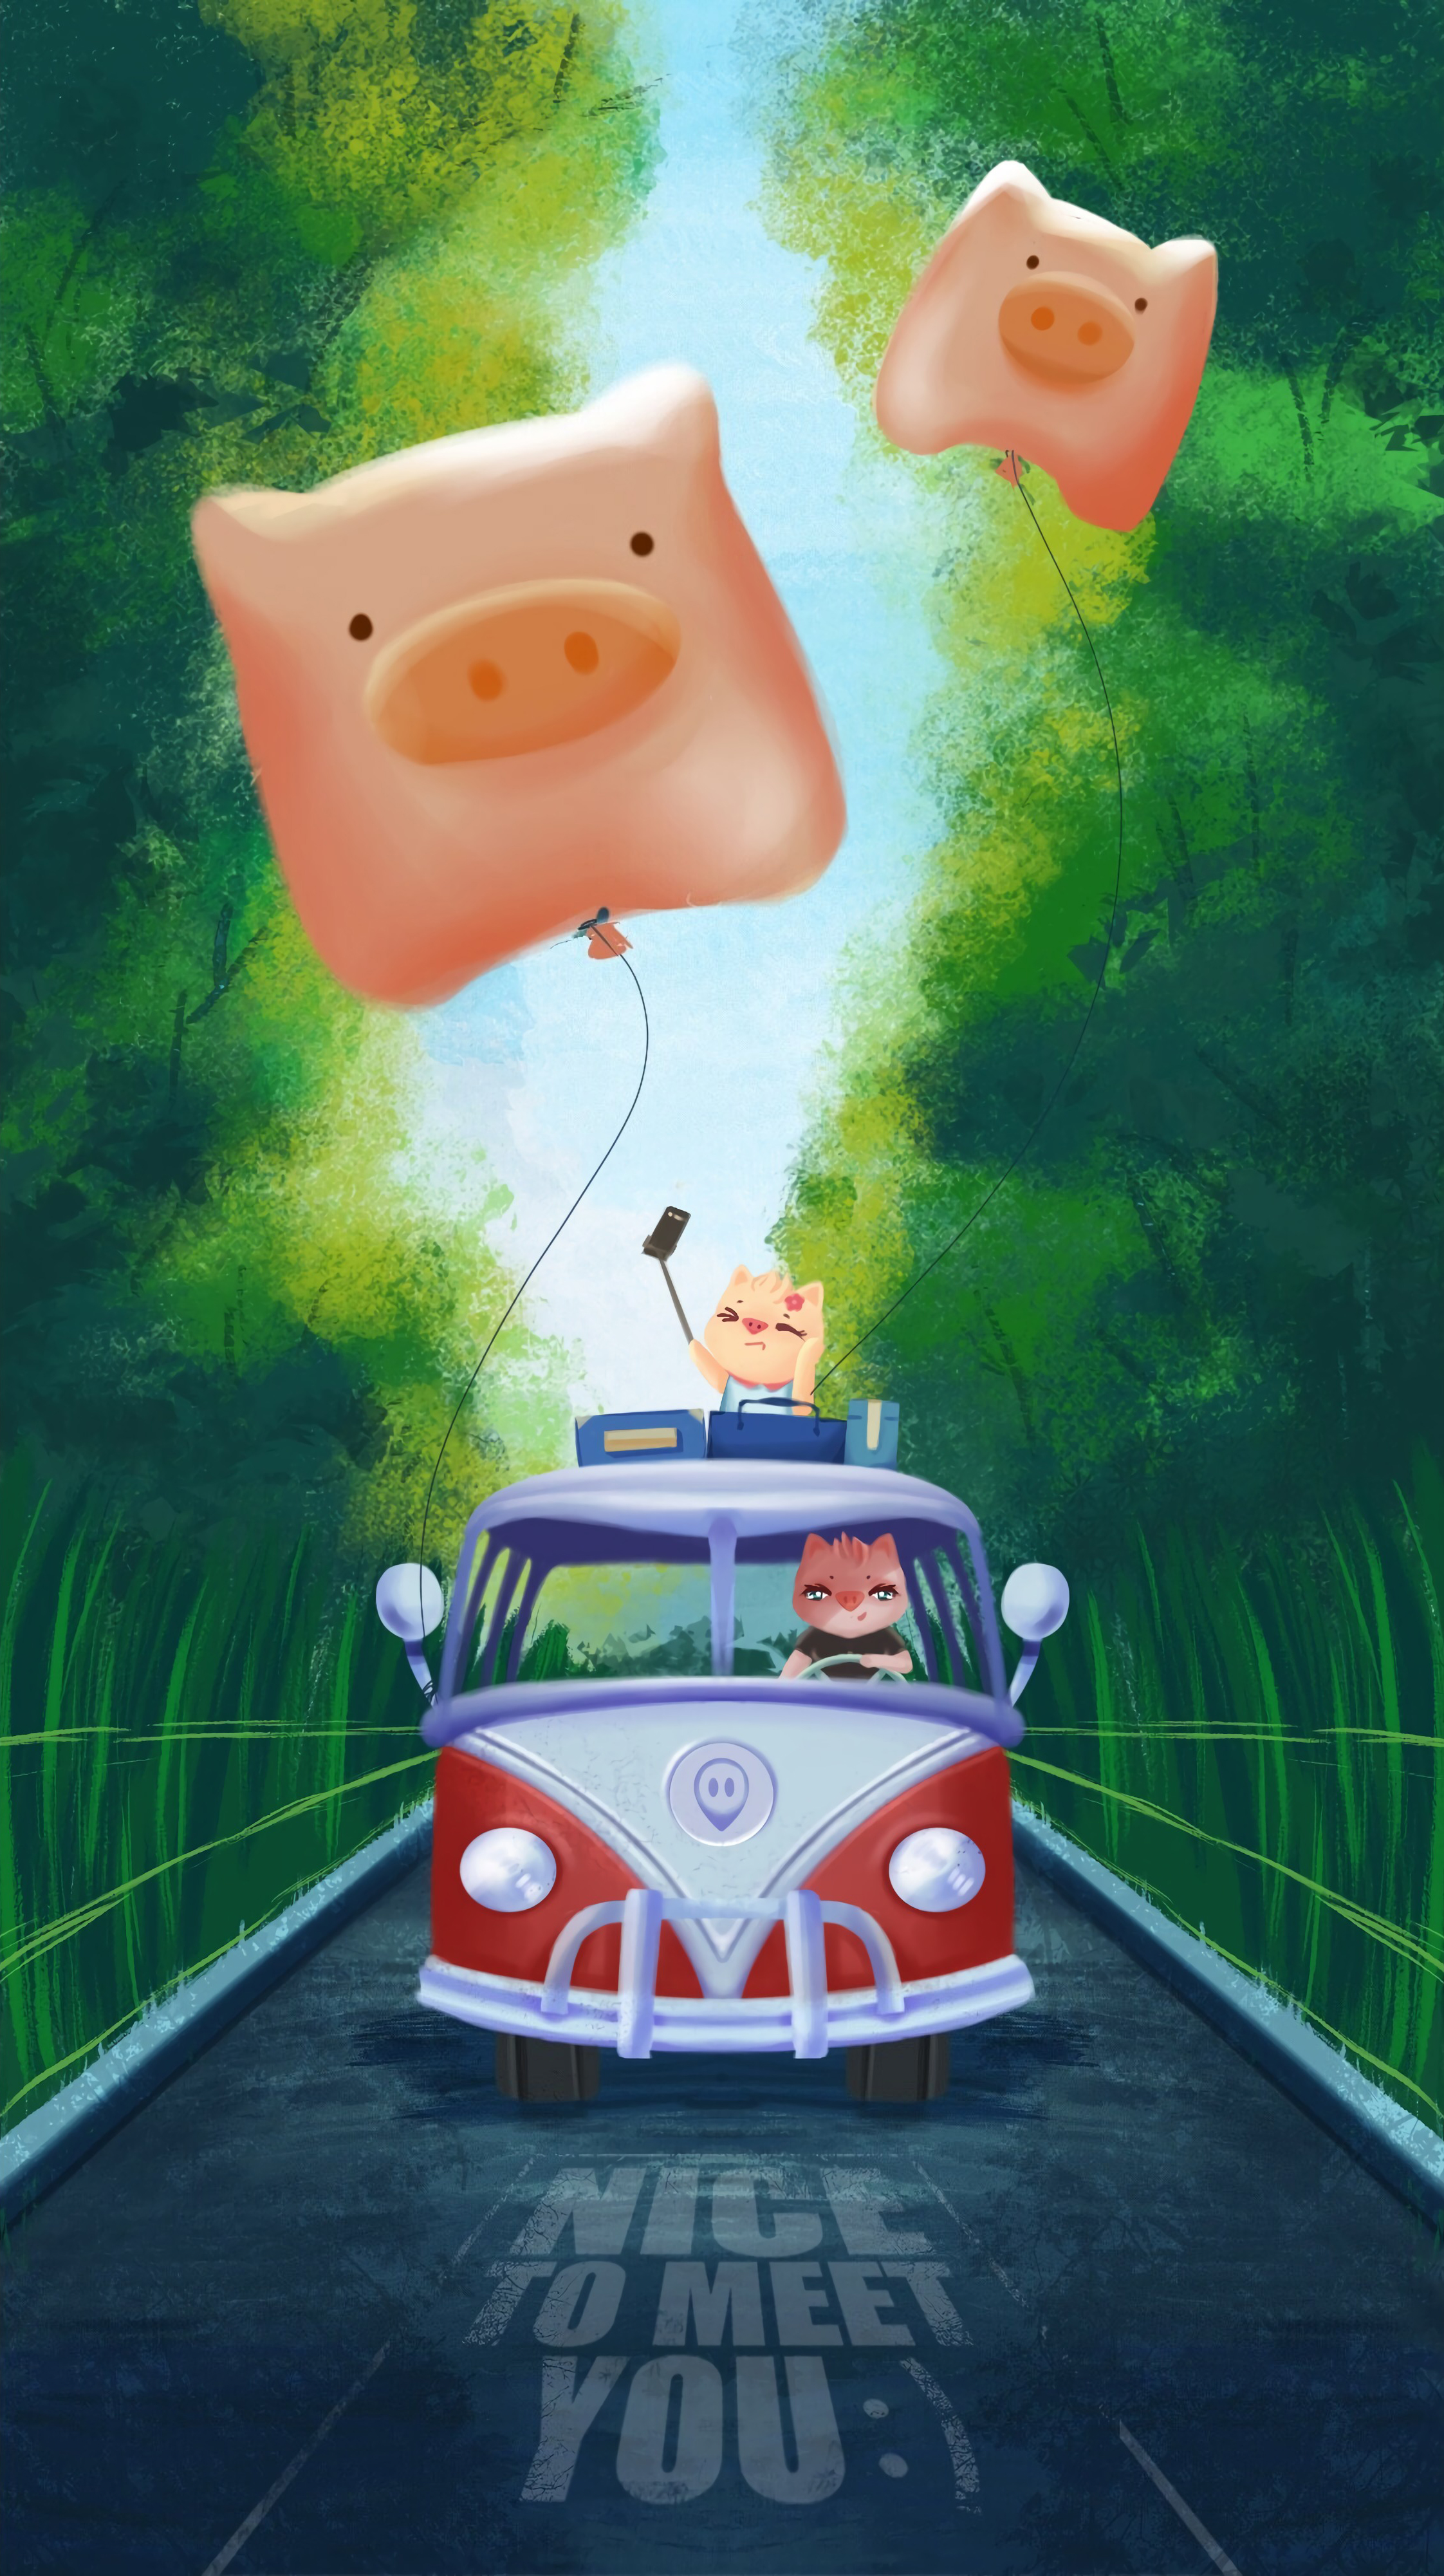 151514 Screensavers and Wallpapers Journey for phone. Download art, pigs, road, journey, van pictures for free